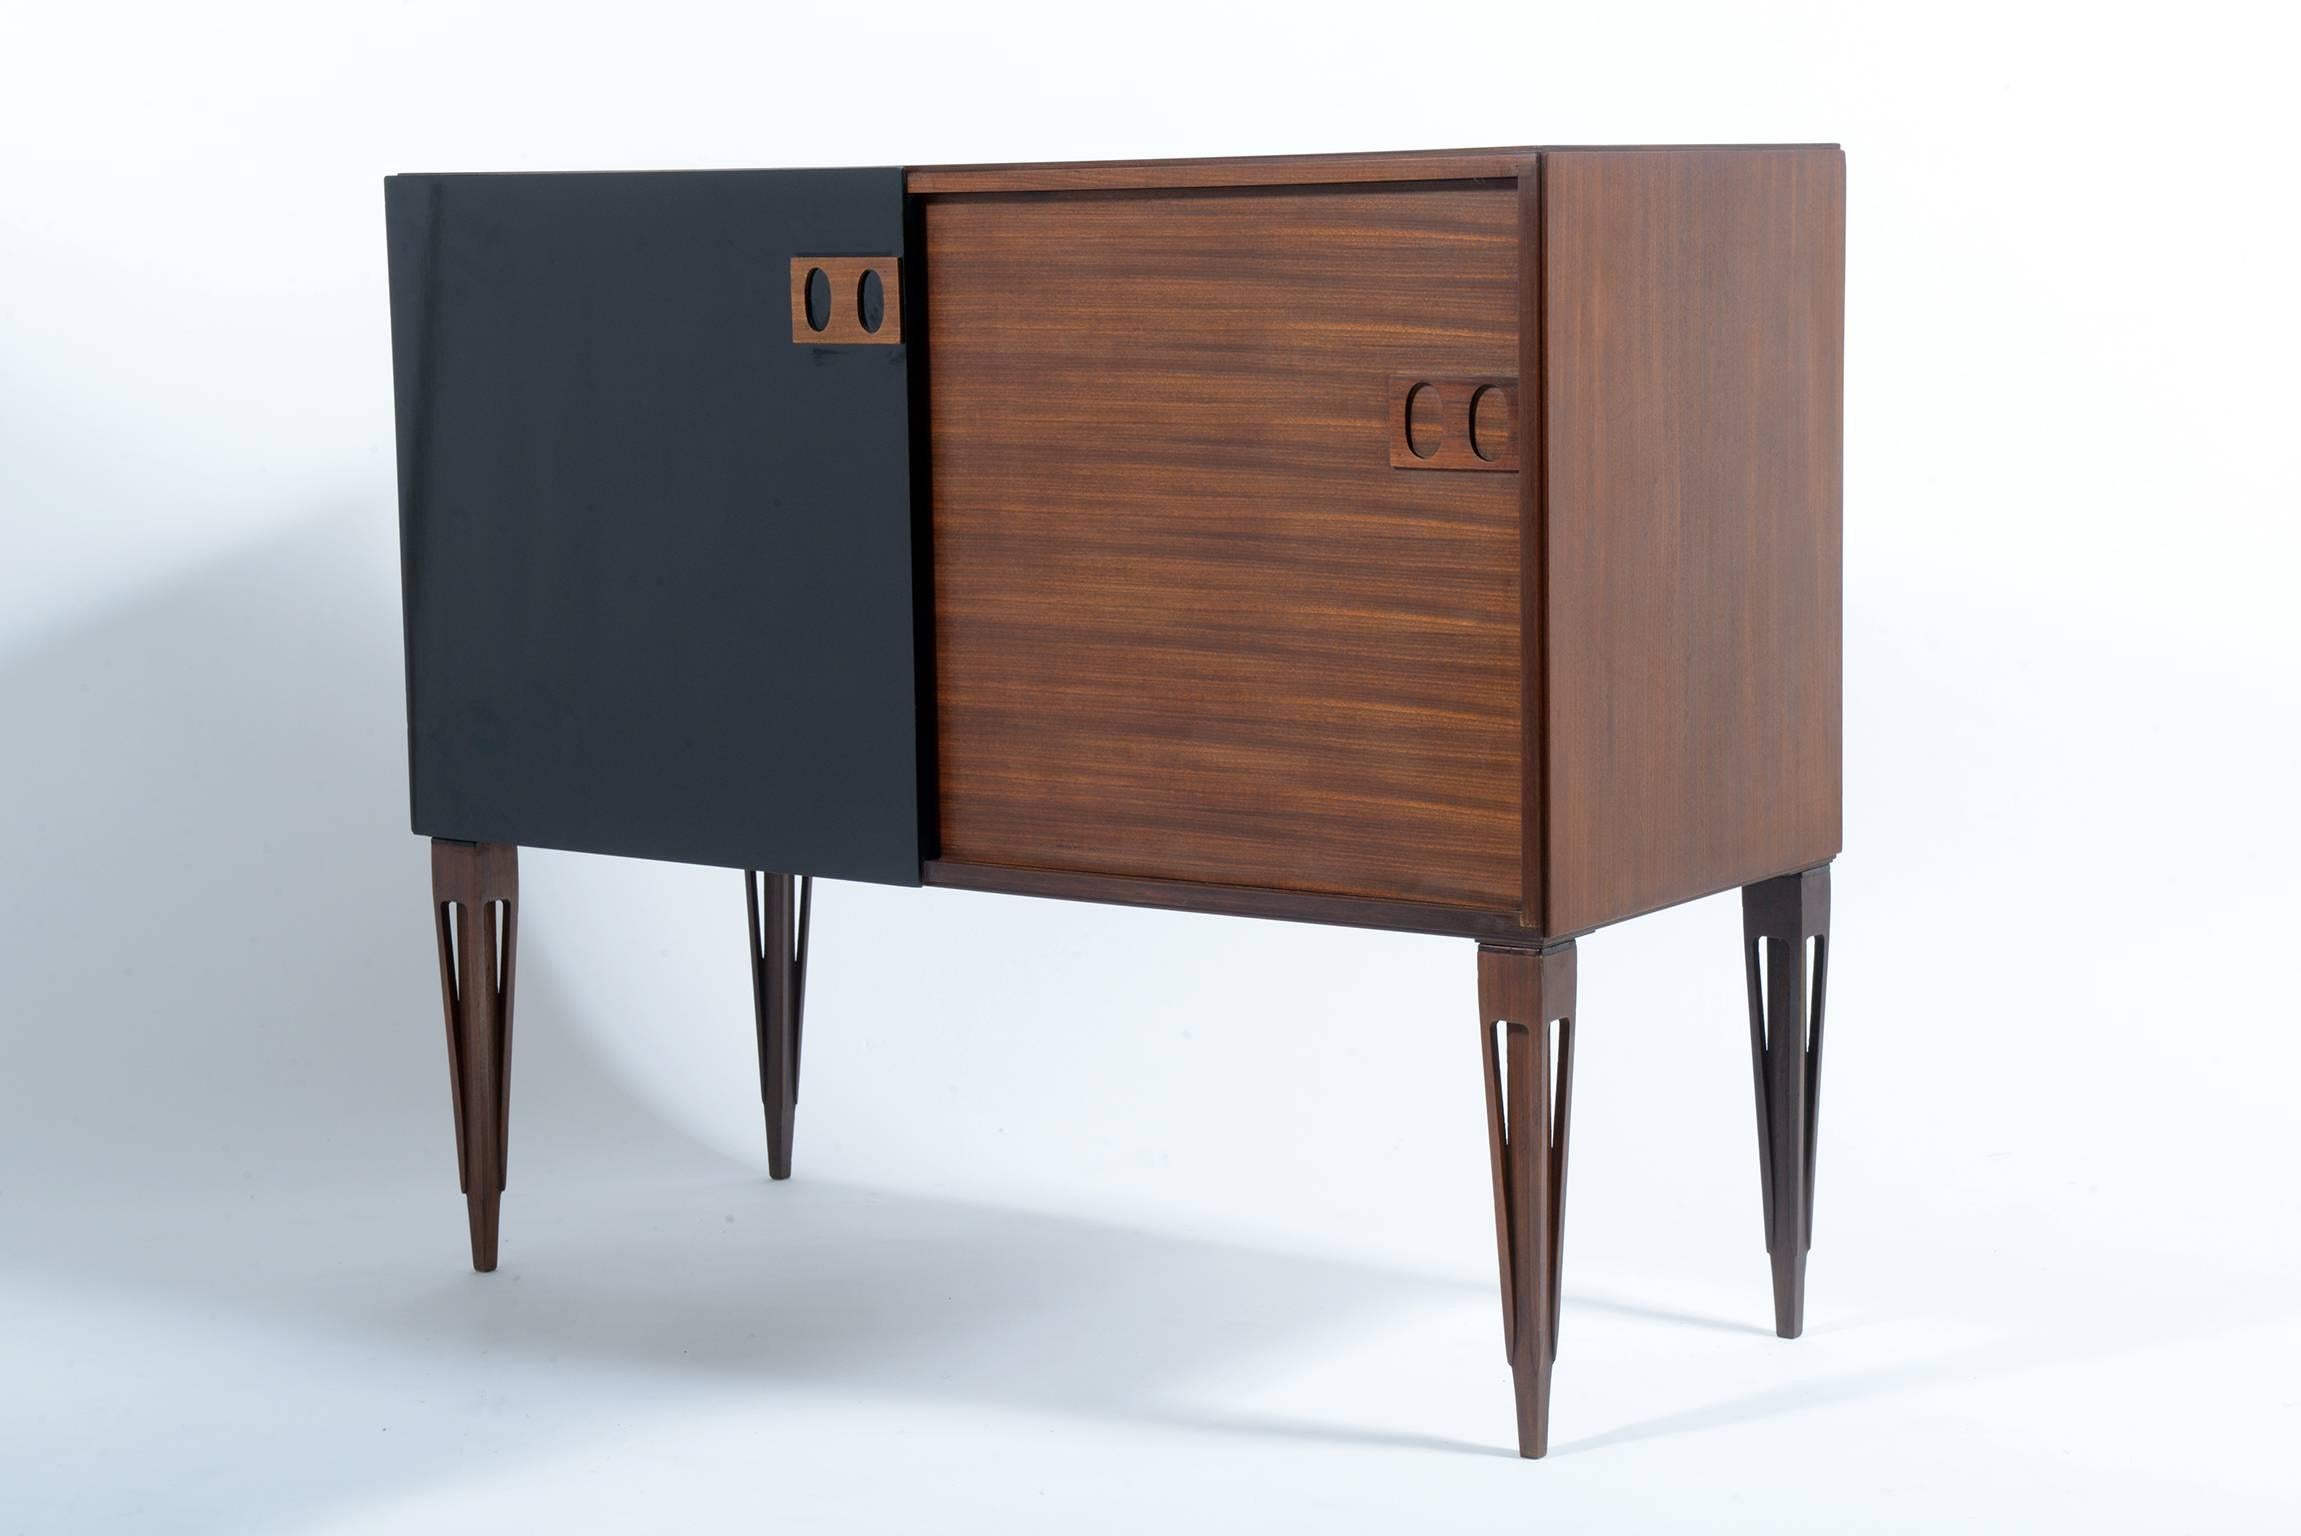 High quality of construction.
Teak wood structures and black lacquered doors.
Signed with Fire Mark by F.lli Proserpio, circa 1960.
Two sliding doors each cabinet with teak shelve inside.
Solid teak sculptured stylish legs.
The cabinets are